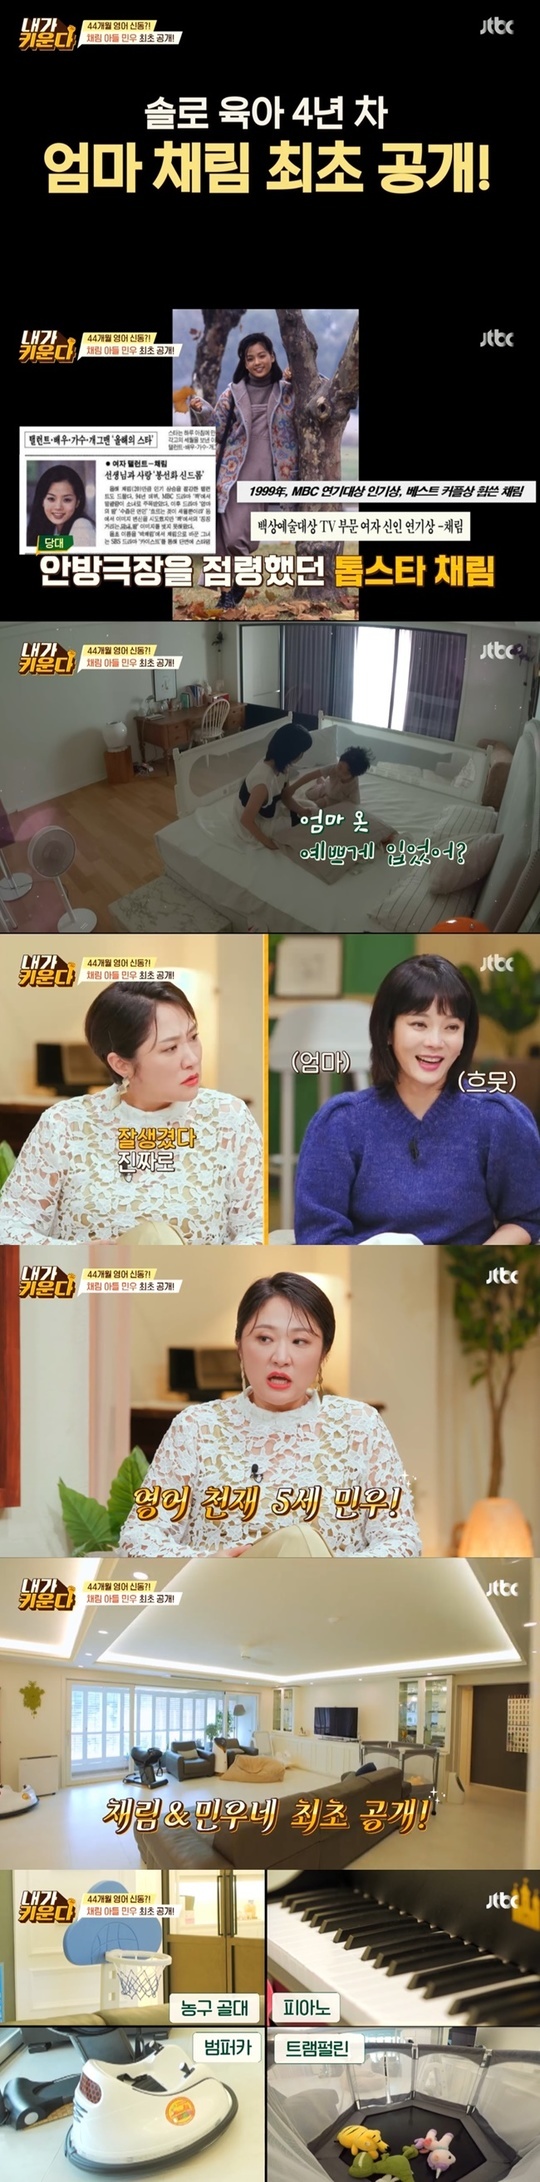 Son+ home release notice Arent you home in CF? (Solo Parenting)Actor Chae Rim is 44 months five-year-oldHunnamson and the house are to be revealed.JTBC Brave Solo Parenting - I Raise broadcast on September 17 Chae Rim and five-year-oldSon Min-woos daily life was foreseen.Kim Na-young and Kim Hyun-Sook expressed their expectation that Chae Rims daily life will be revealed, saying, I wonder what kind of mother she is, and I think I know the child psychology.Chae Rimson Minwoo in the video, which was released together, said, Why did you wear your mothers clothes beautifully? Its pretty even if you tie your hair.In Minwoos lovely visual, Kim Hyun-Sook was impressed by good-looking and real, and Chae Rim showed a smile.In particular, Minwoo has been reading the alphabet since morning, and freely speaking English, focusing attention. Kim Na-young said, Is not it genius?Kim Hyun-Sook was surprised that learning skills do not seem to be a joke. The house, which is all but Chae Rims absence, which usually lived with the word I am in my house, was also revealed.In the size of a magnificent house, Kim Hyun-Sook was surprised, saying, Is not it a house in the CF?Kim Na-young looked at three refrigerators and admired it as one refrigerator per person.In addition to this, I have seven kinds of snacks, as well as basketball goal, piano, bumper car.